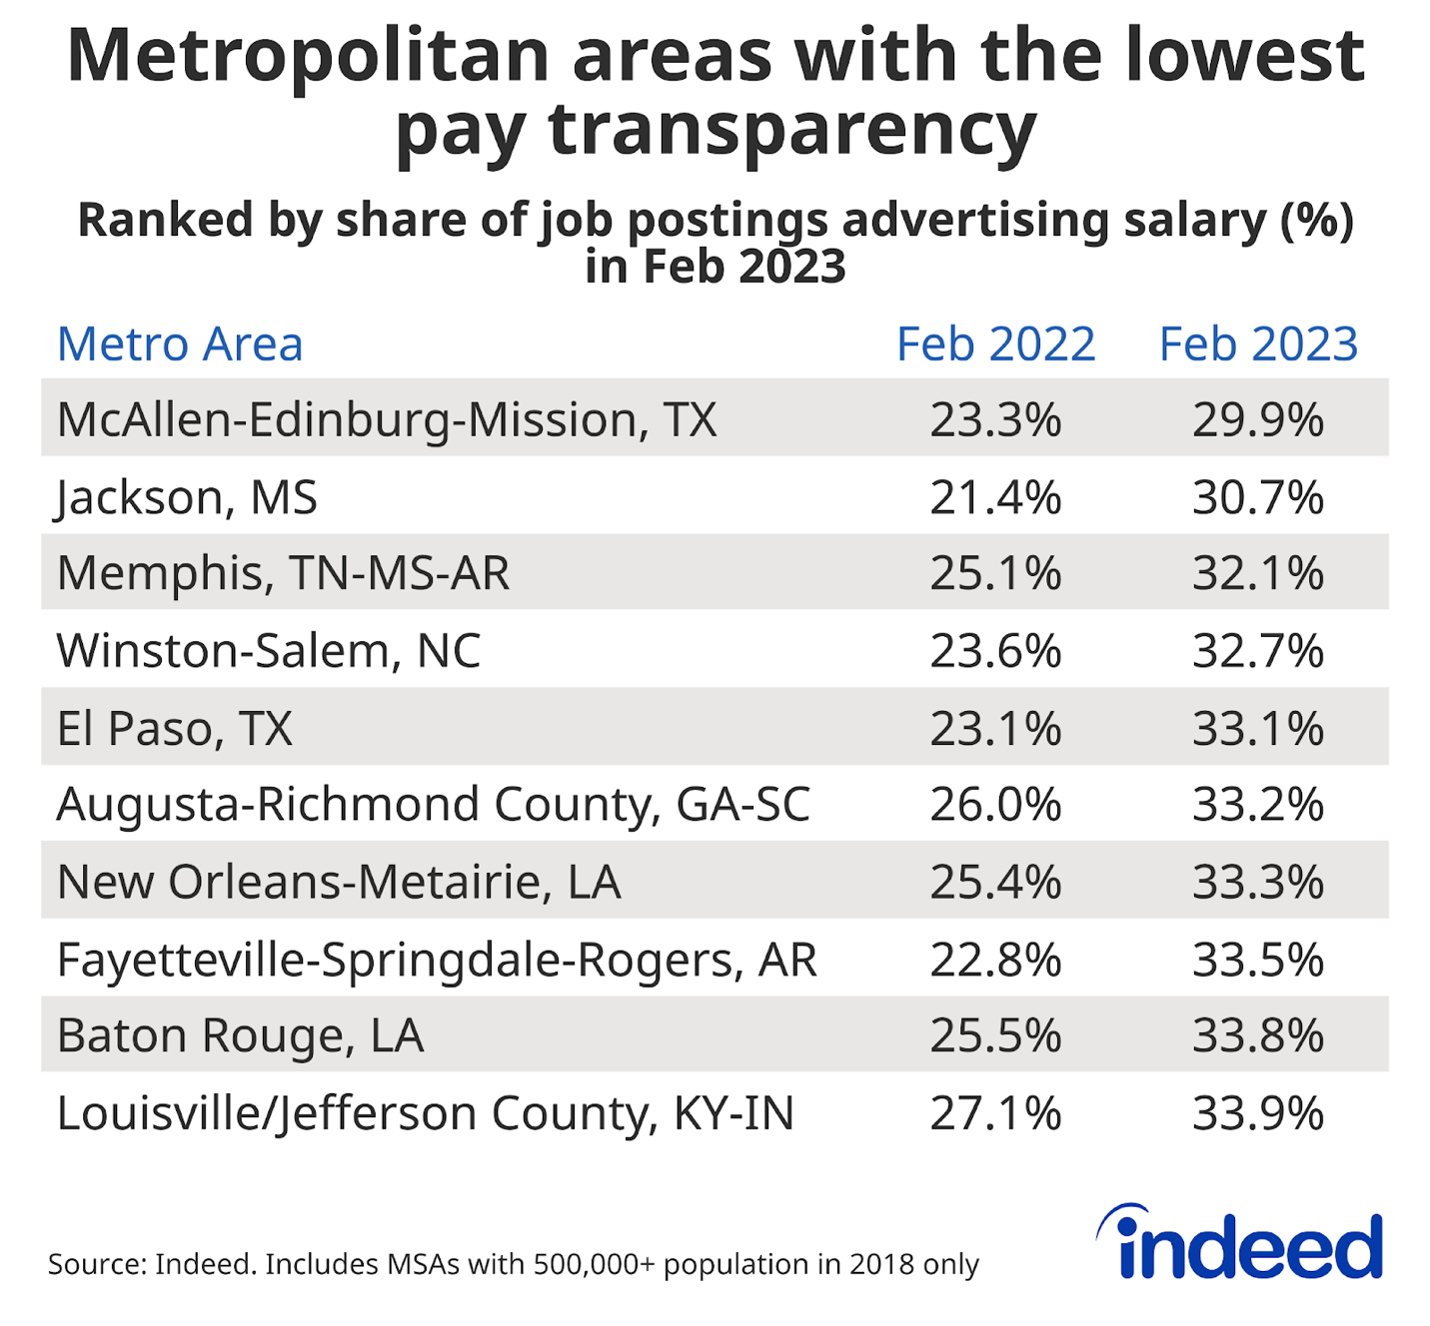 Metropolitan areas with the lowest pay transparency.